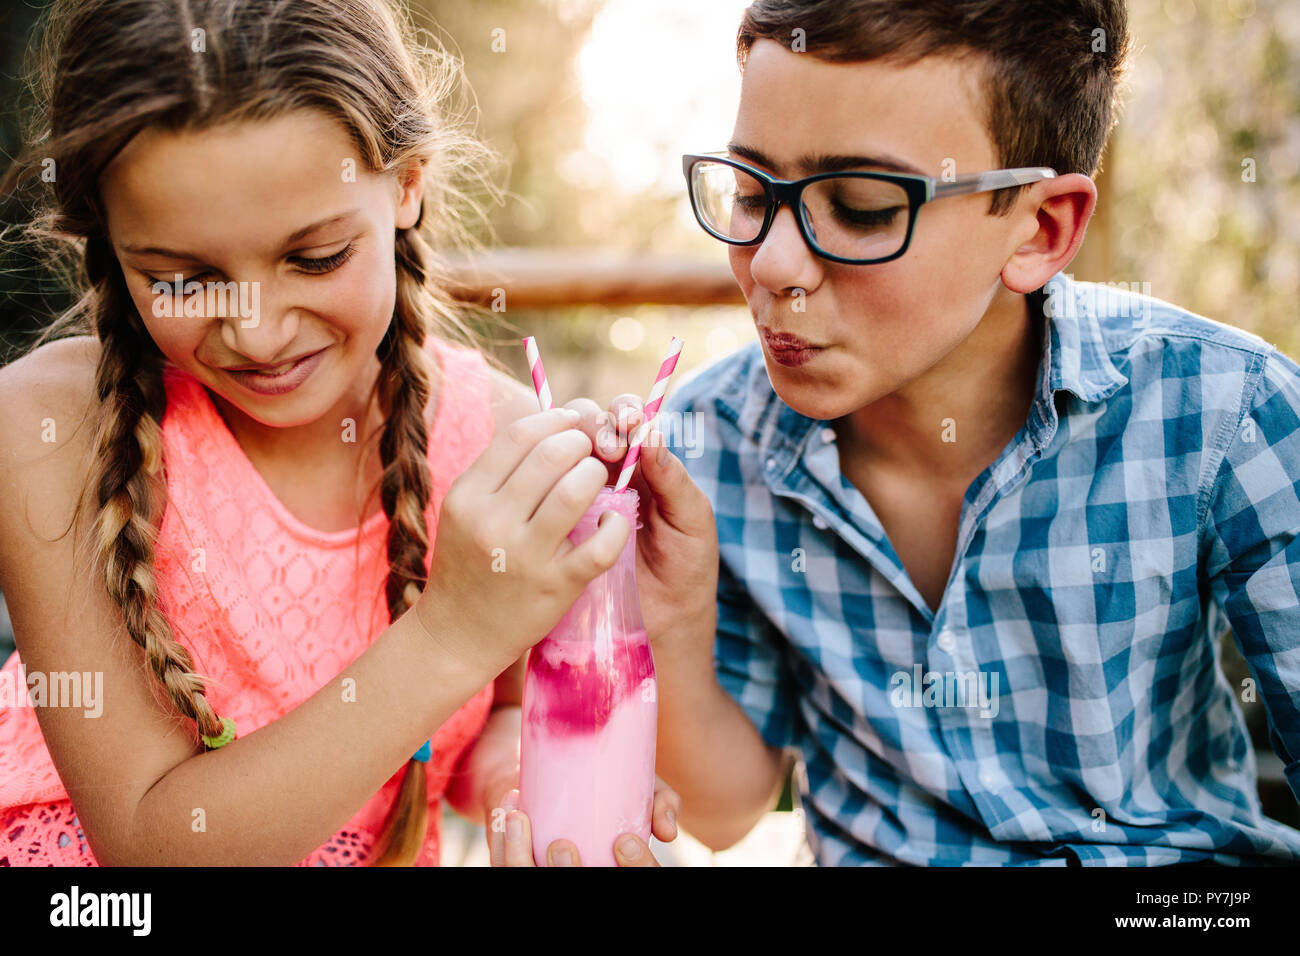 Close up of kids in love sitting outdoors drinking a smoothie with two straws. Smiling boy and girl sharing a milk shake sitting outdoors. Stock Photo